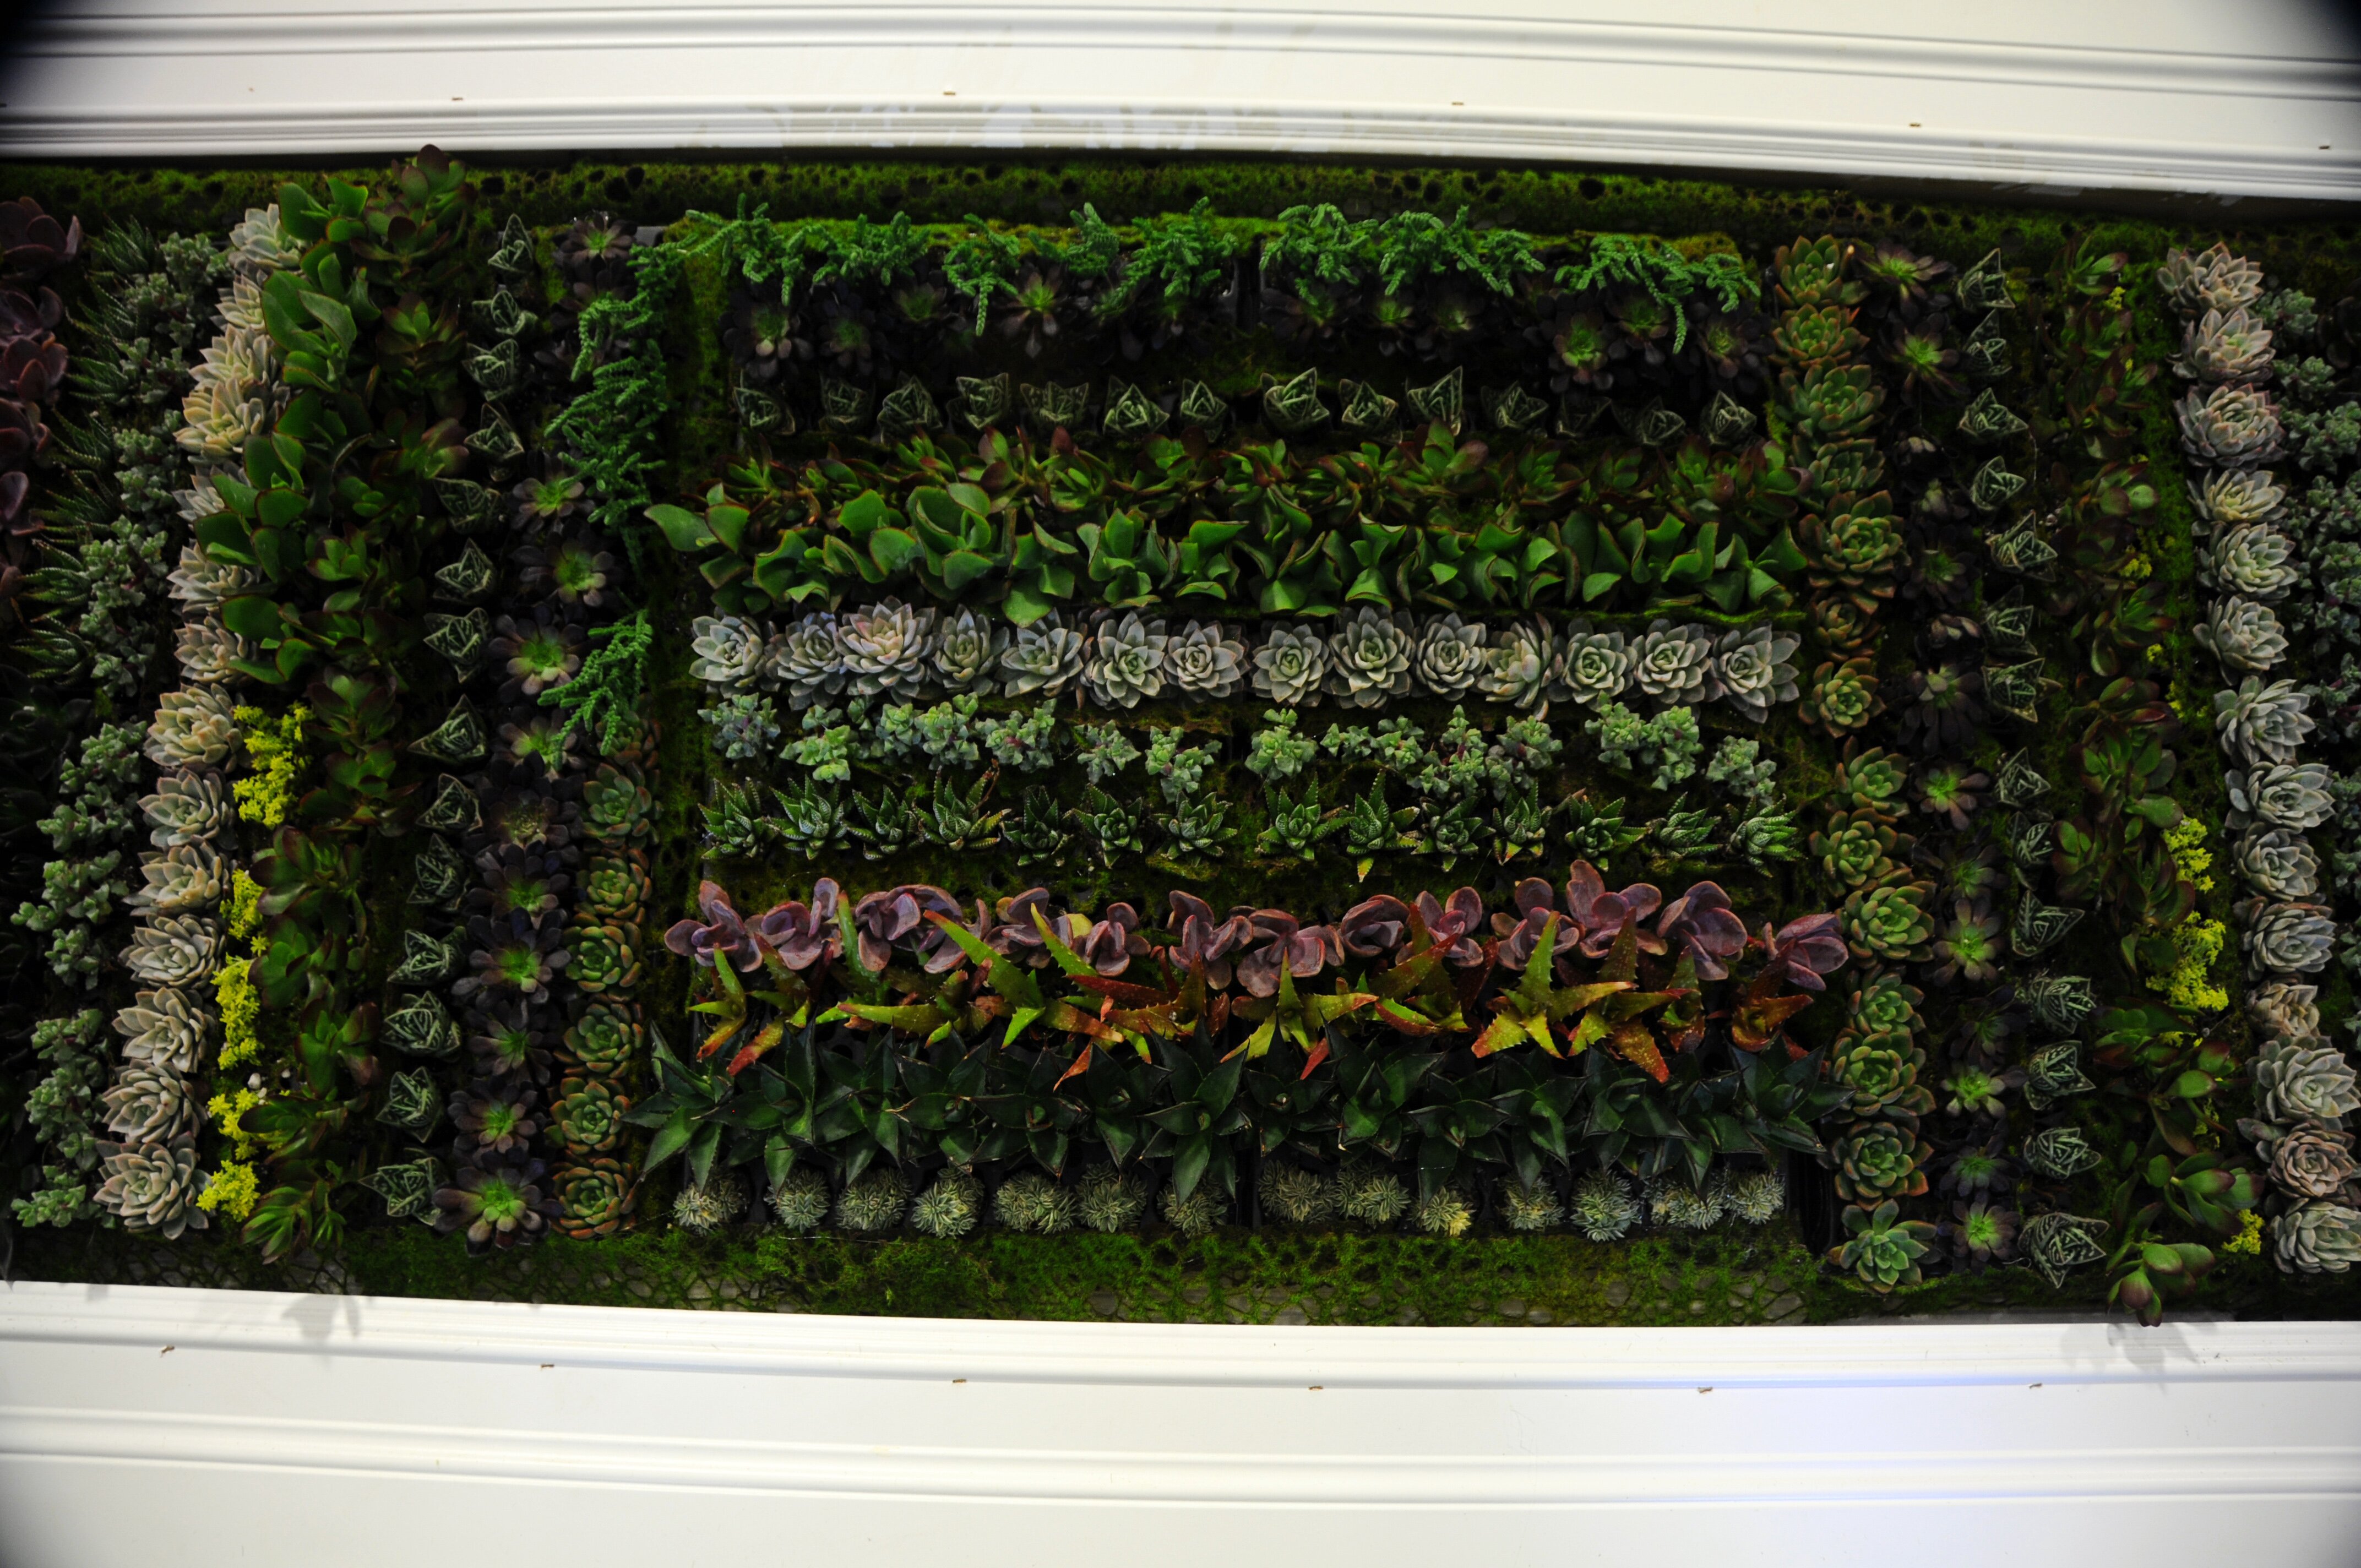 504 succulents were used to create a living picture- all foliage, no flowers!